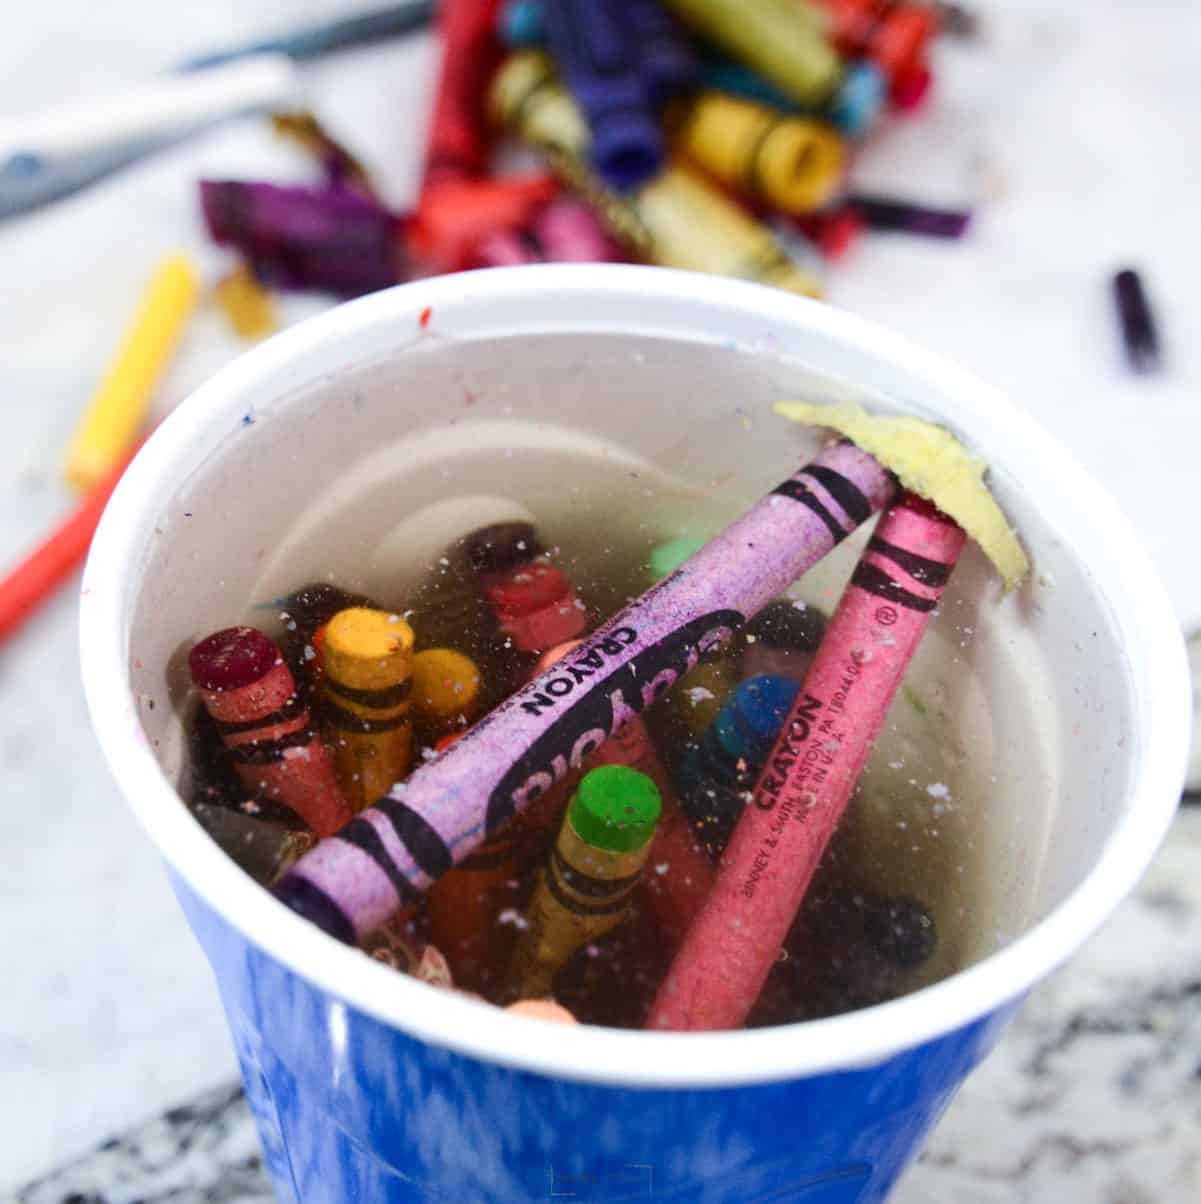 crayons soaking in water in cup.